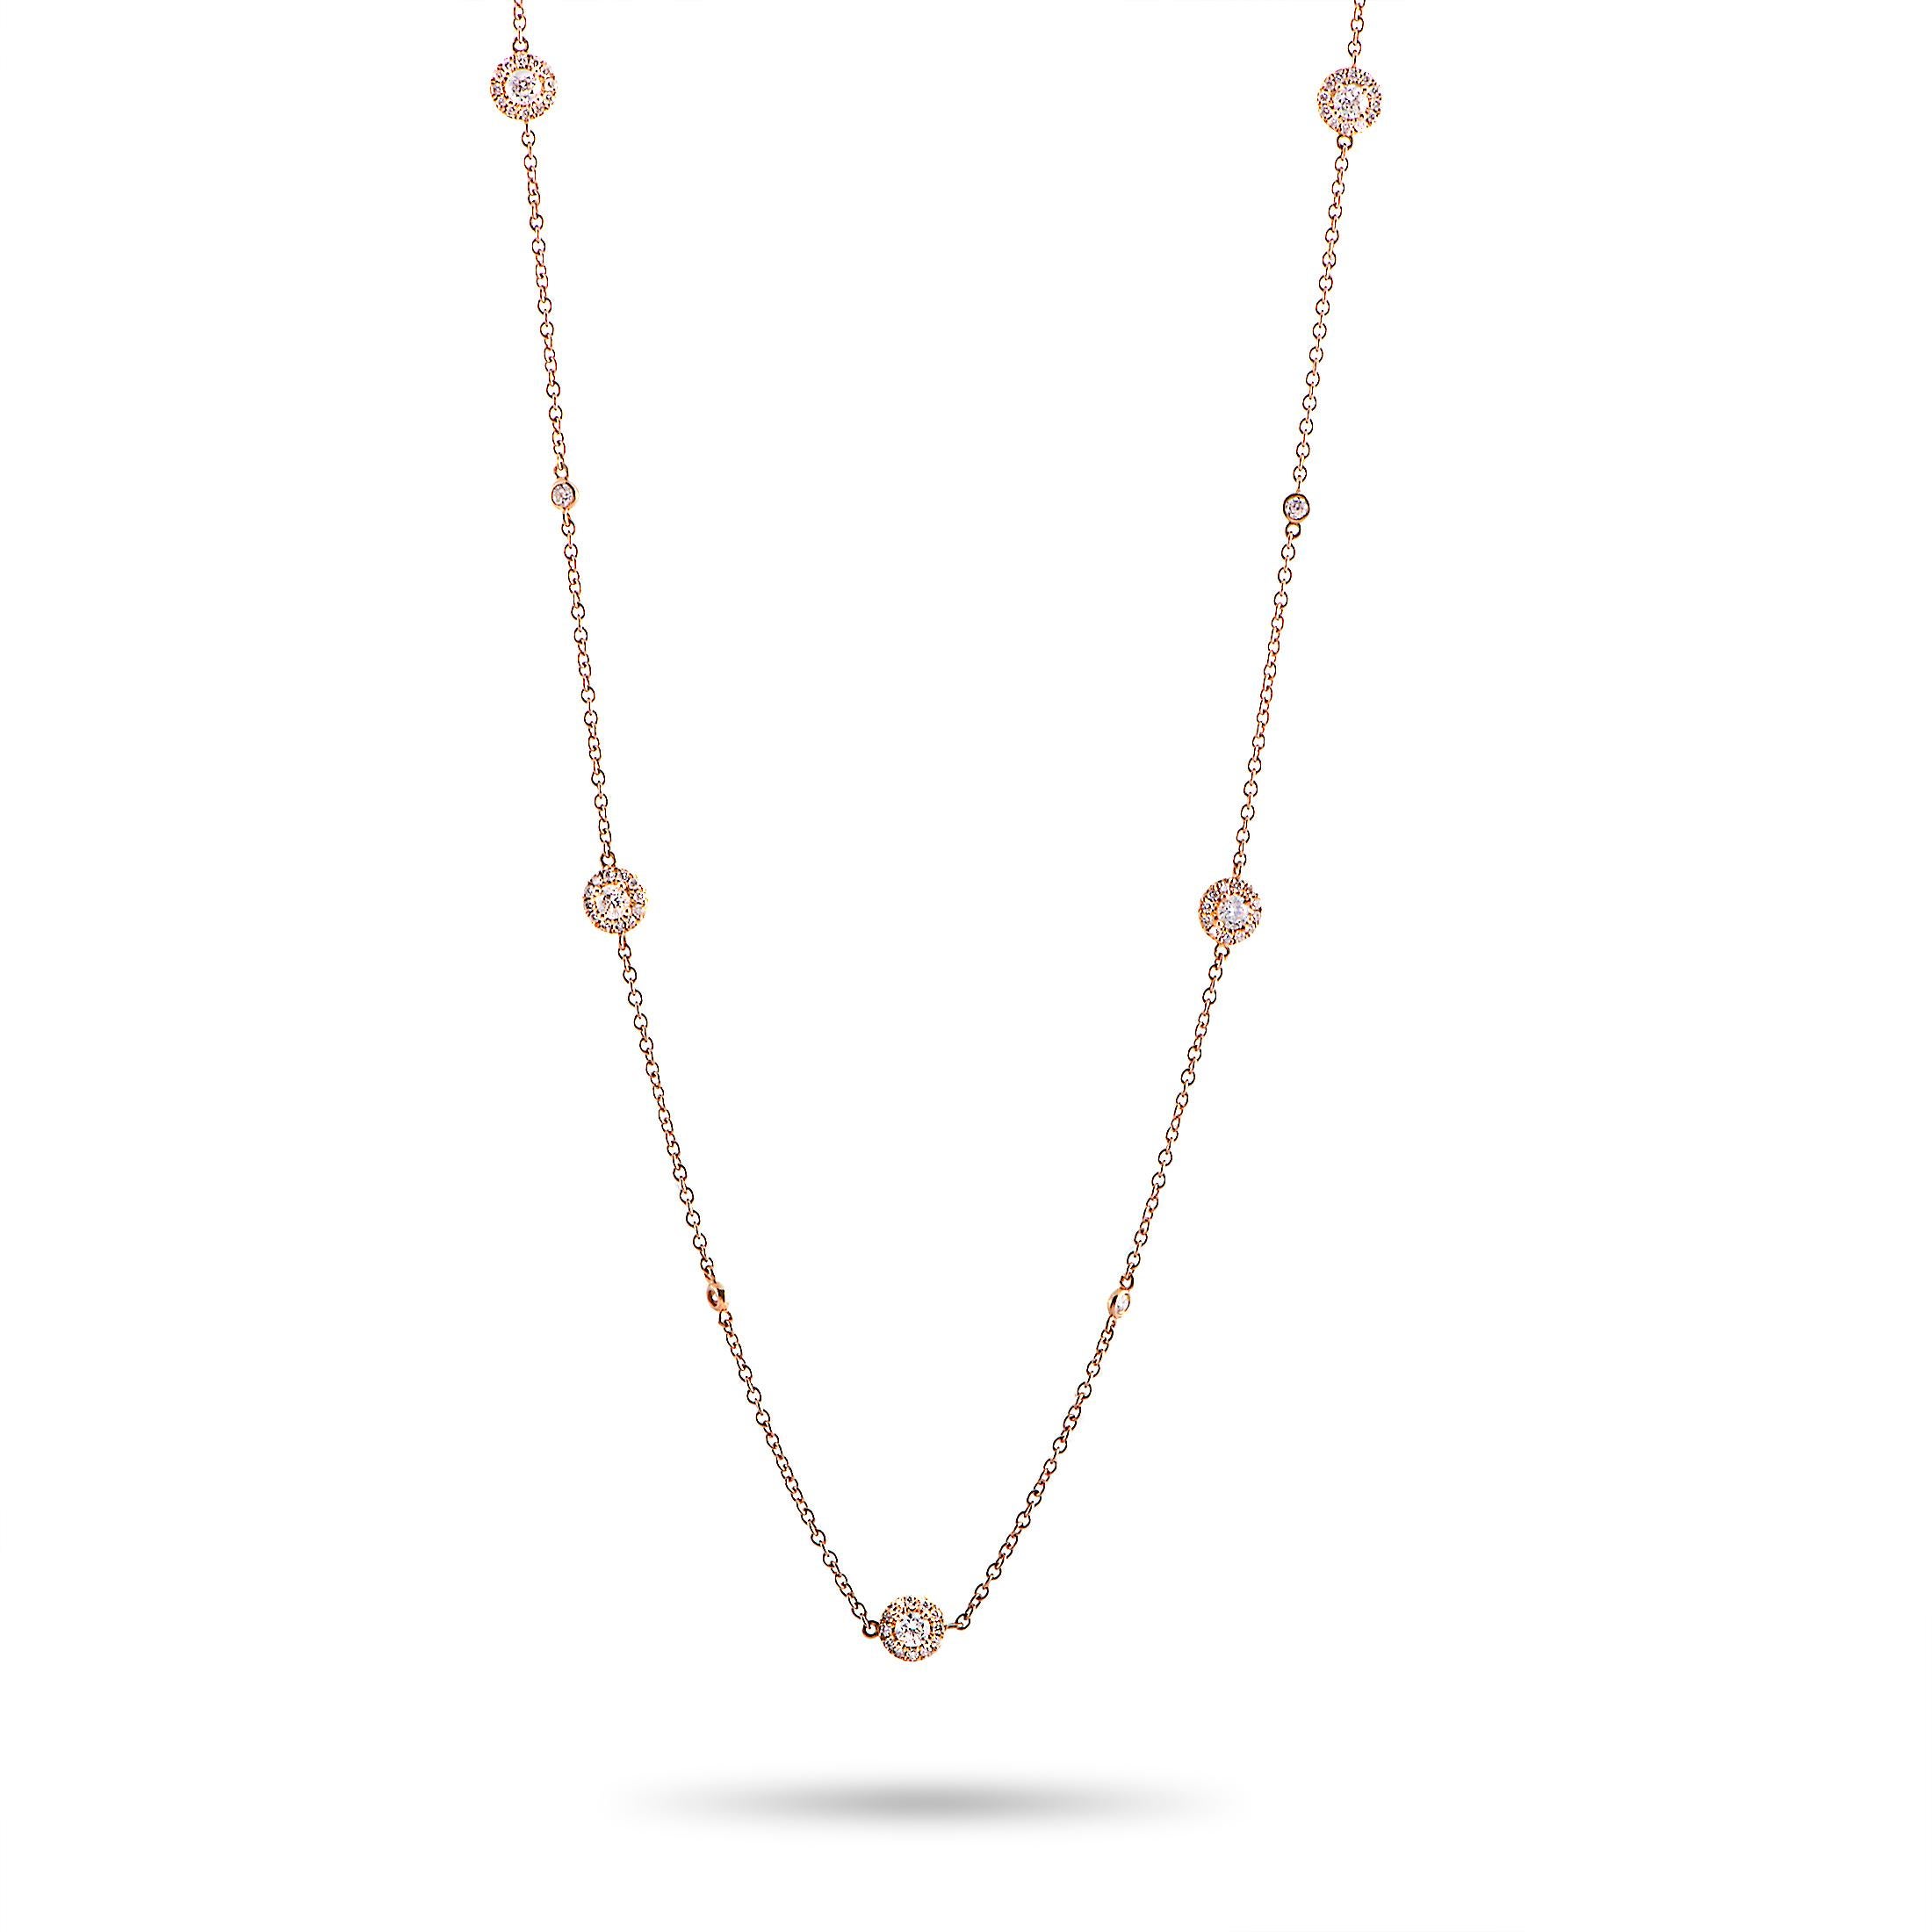 This LB Exclusive necklace is crafted from 18K rose gold and weighs 9.2 grams, measuring 40” in length. The necklace is set with diamonds that weigh 3.01 carats in total.

Offered in brand new condition, this jewelry piece includes a gift box.